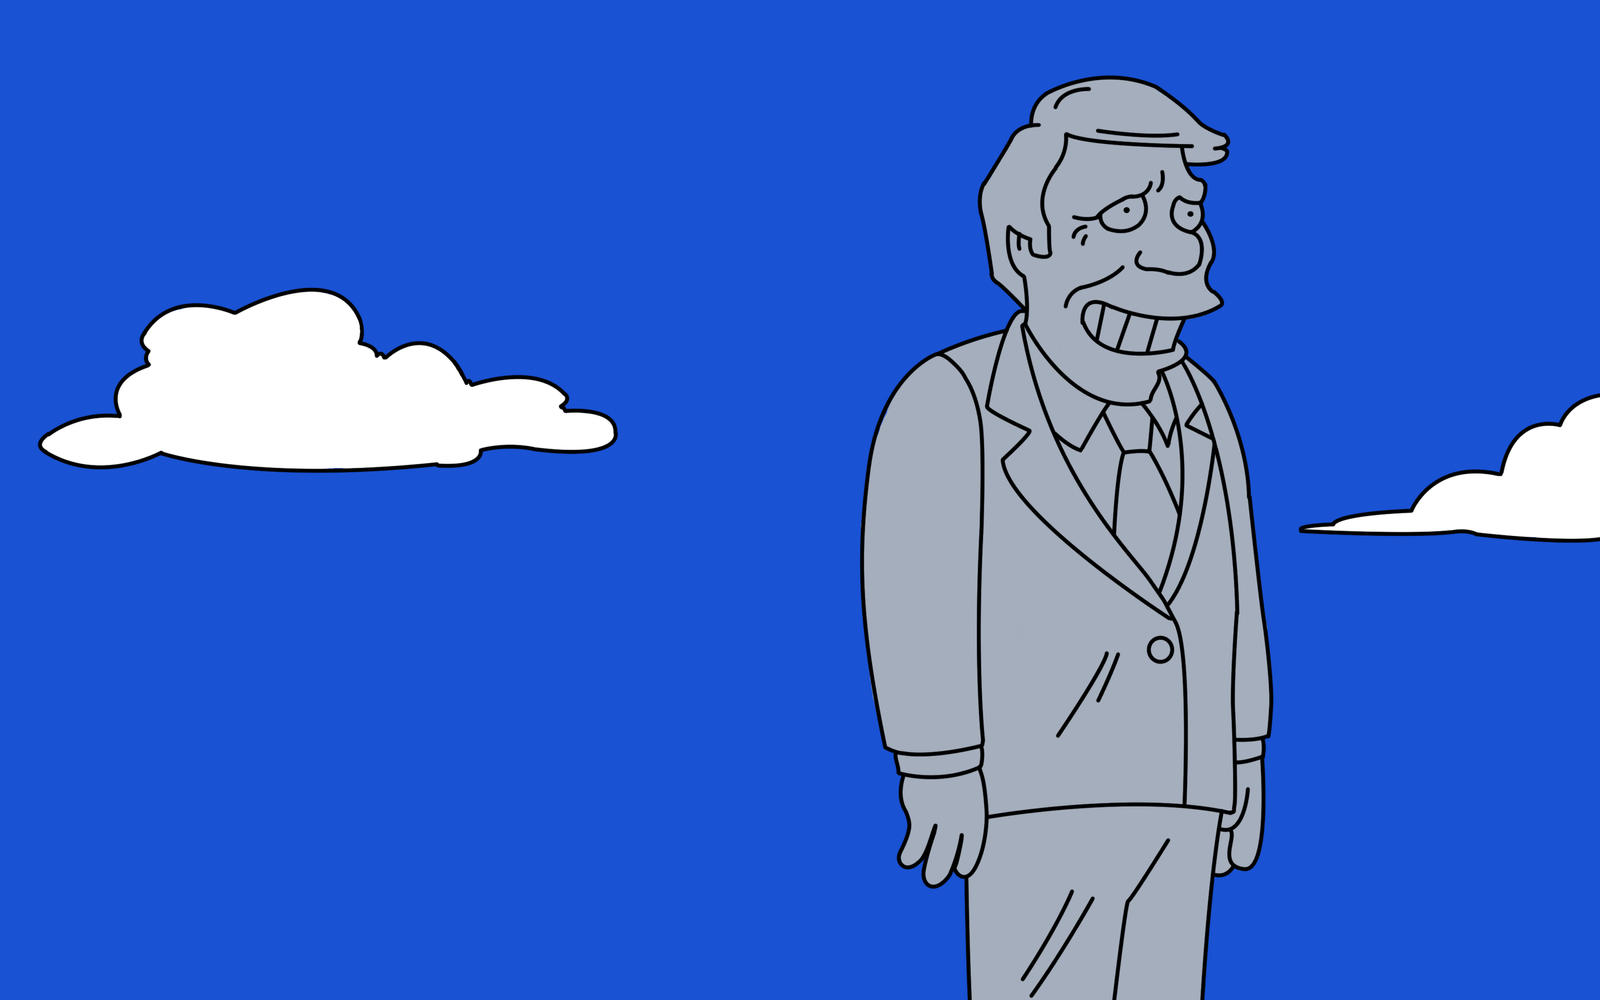 Screen capture of a Jimmy Carter statue from 
the show 'The Simpsons'